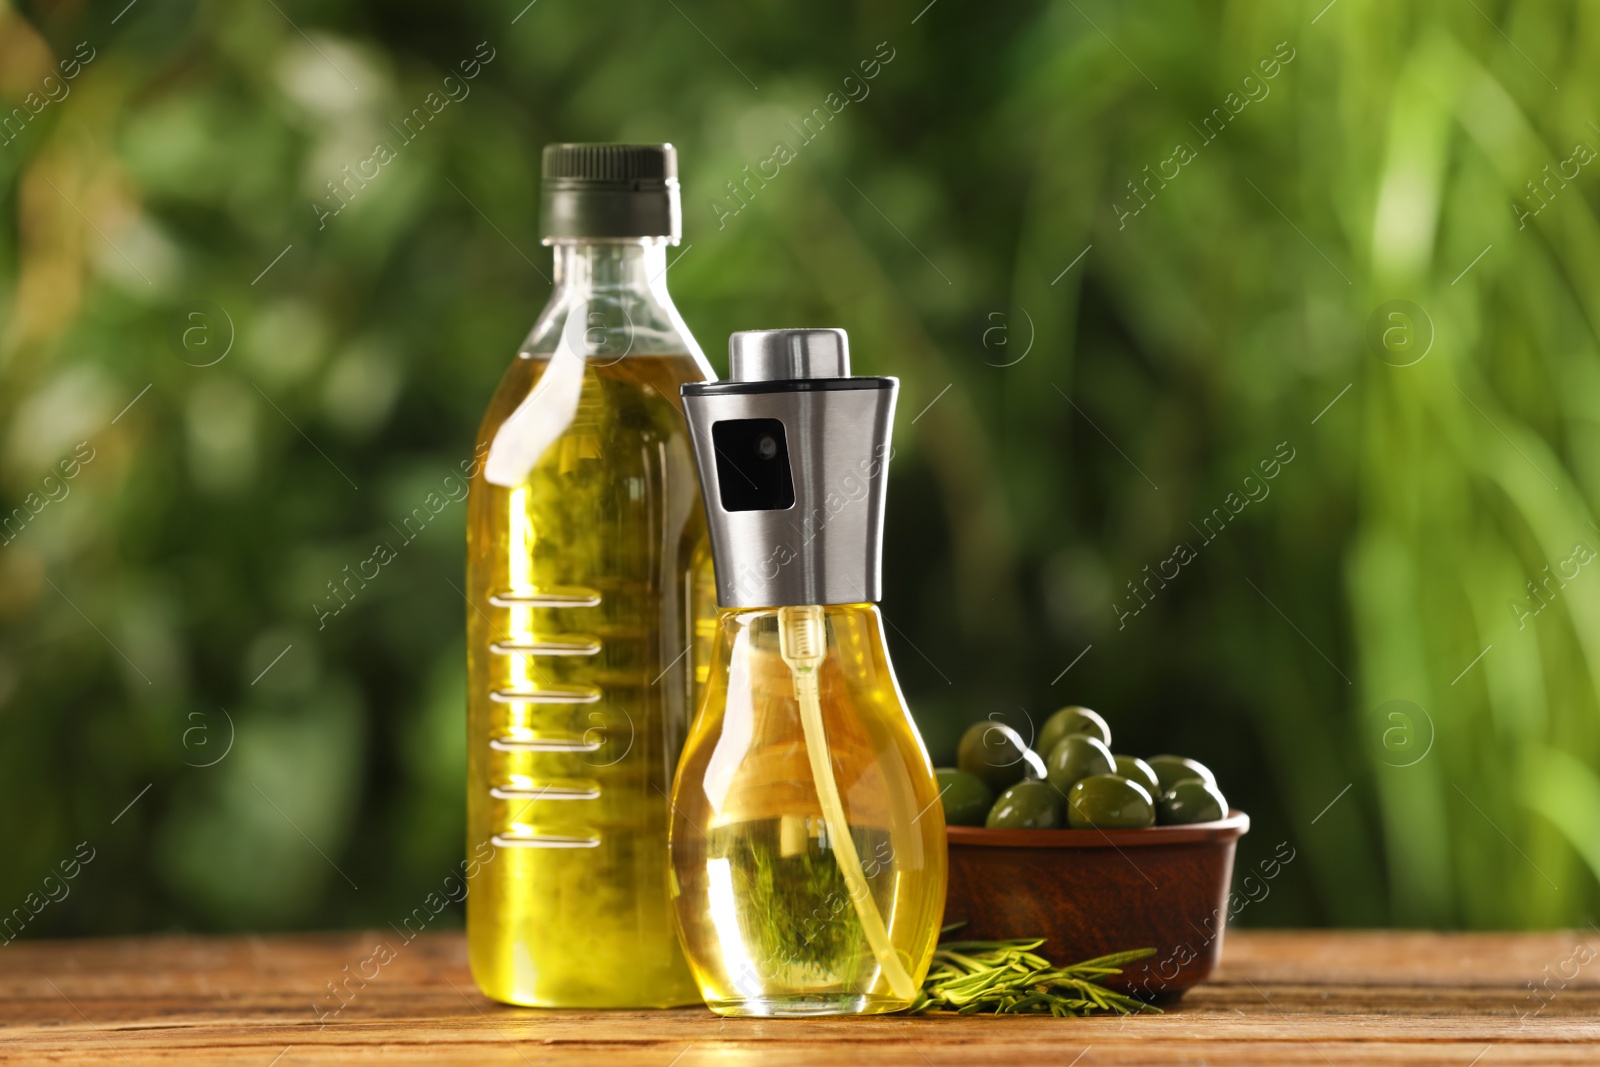 Photo of Bottles with cooking oil, olives and rosemary on wooden table against blurred background